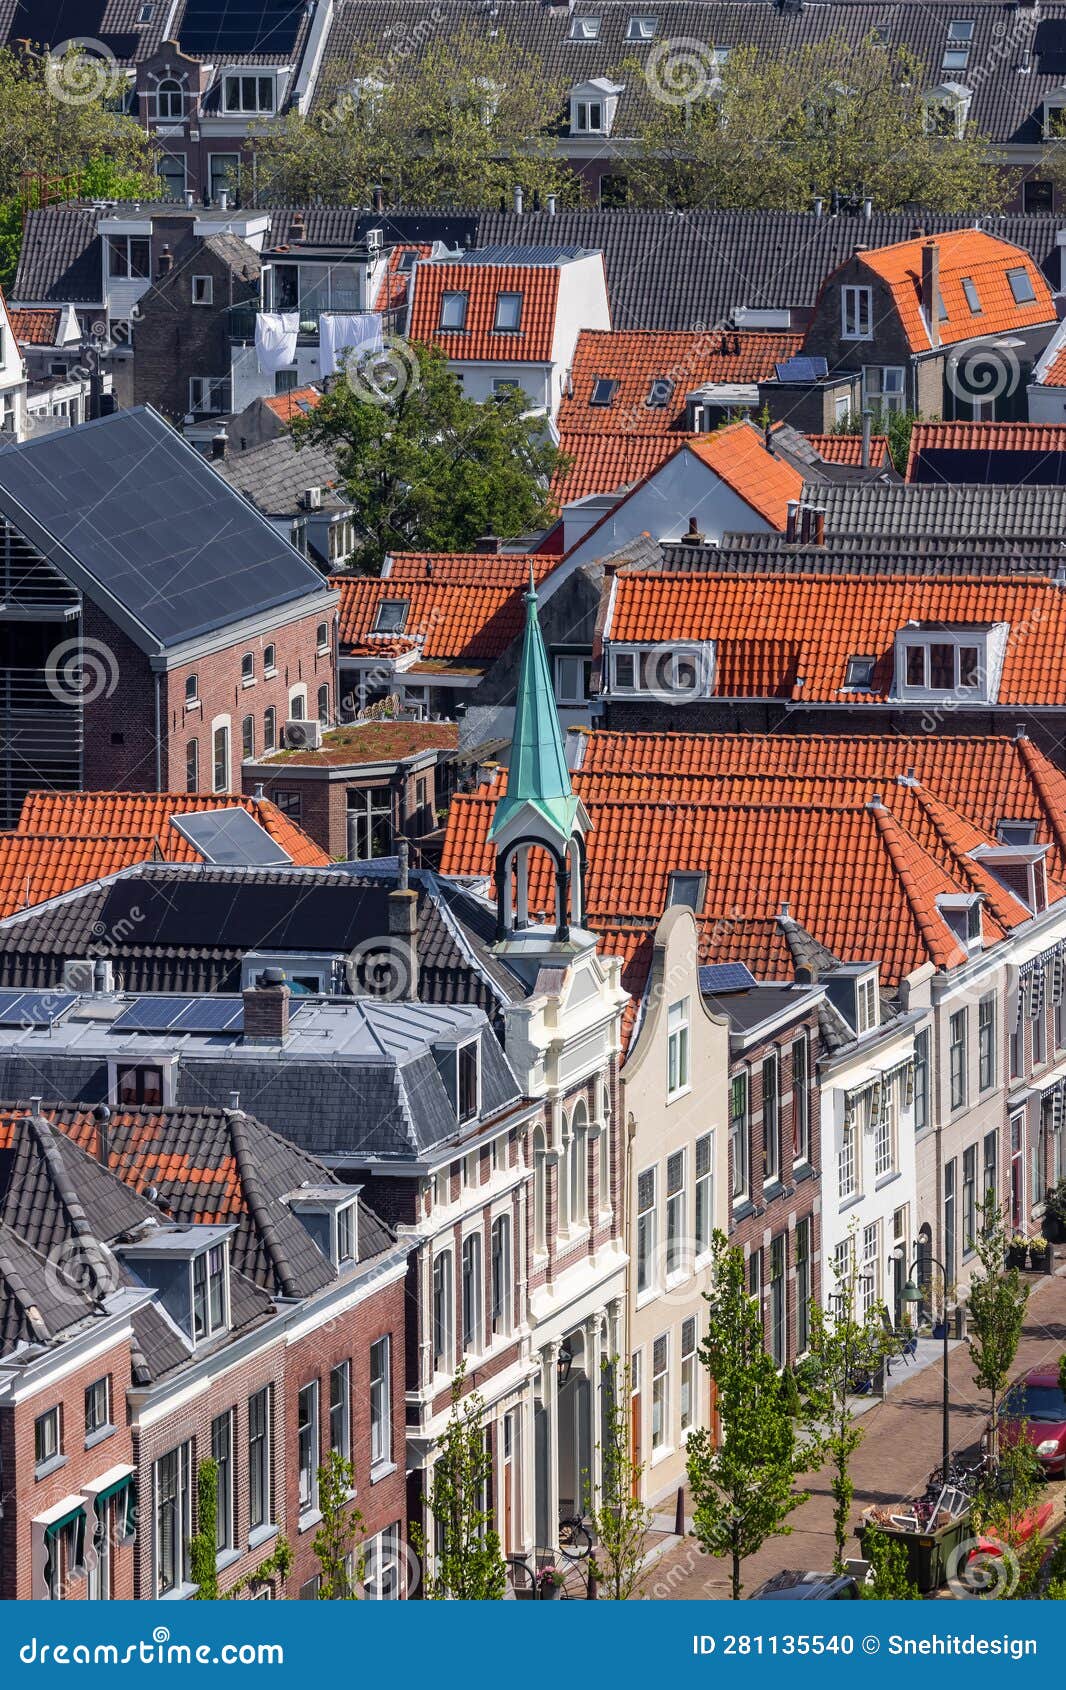 aerial view of typical colorful dutch style homes in delft city centrum, netherlands